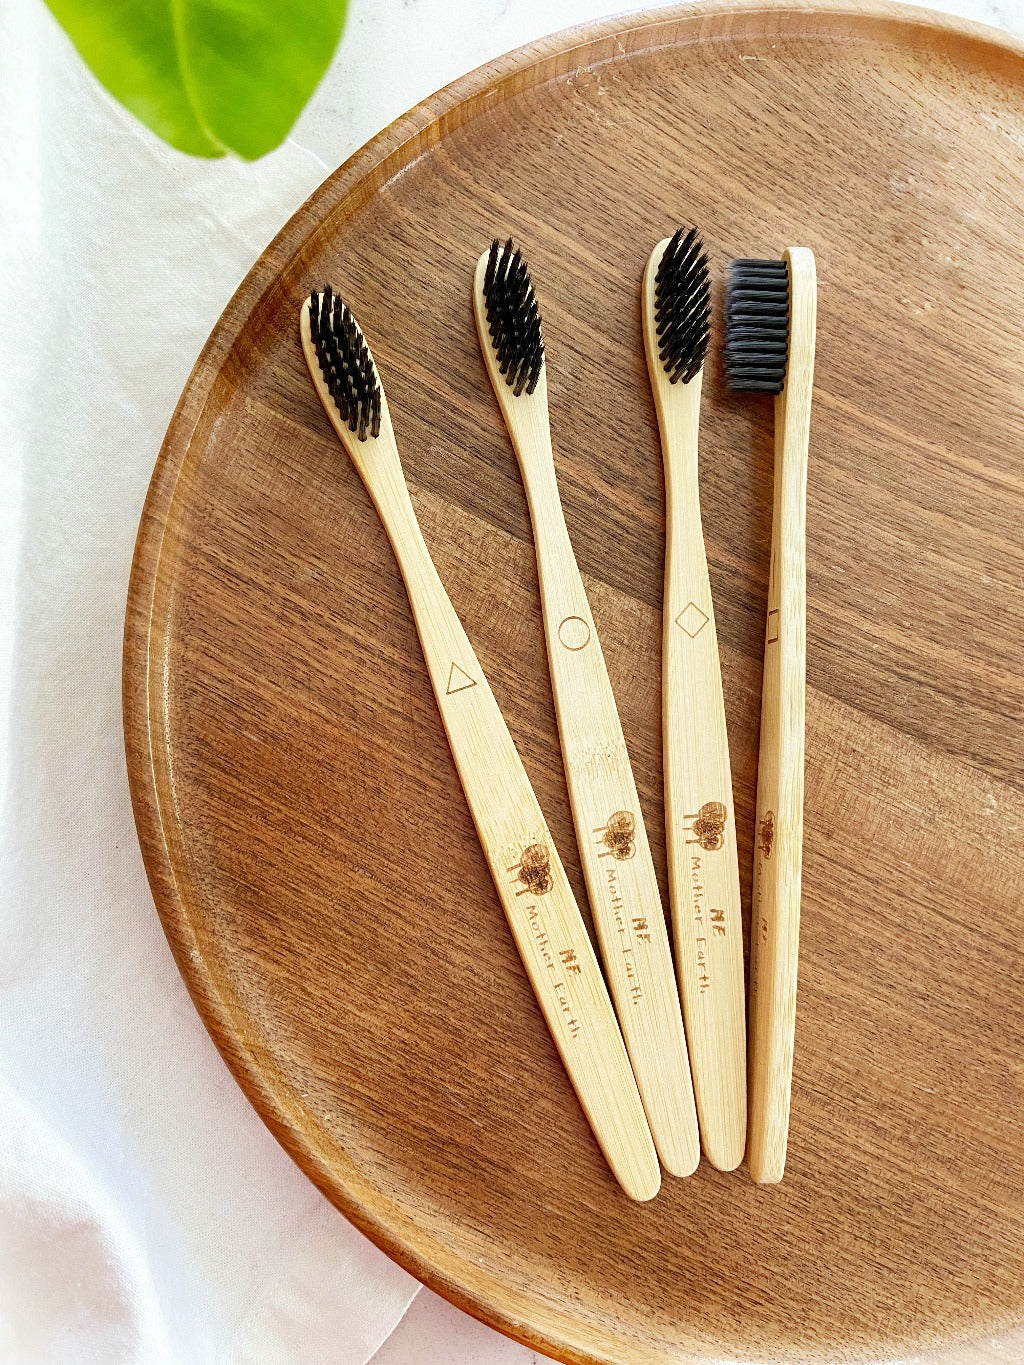 Bamboo Charcoal Toothbrush - Case of 8